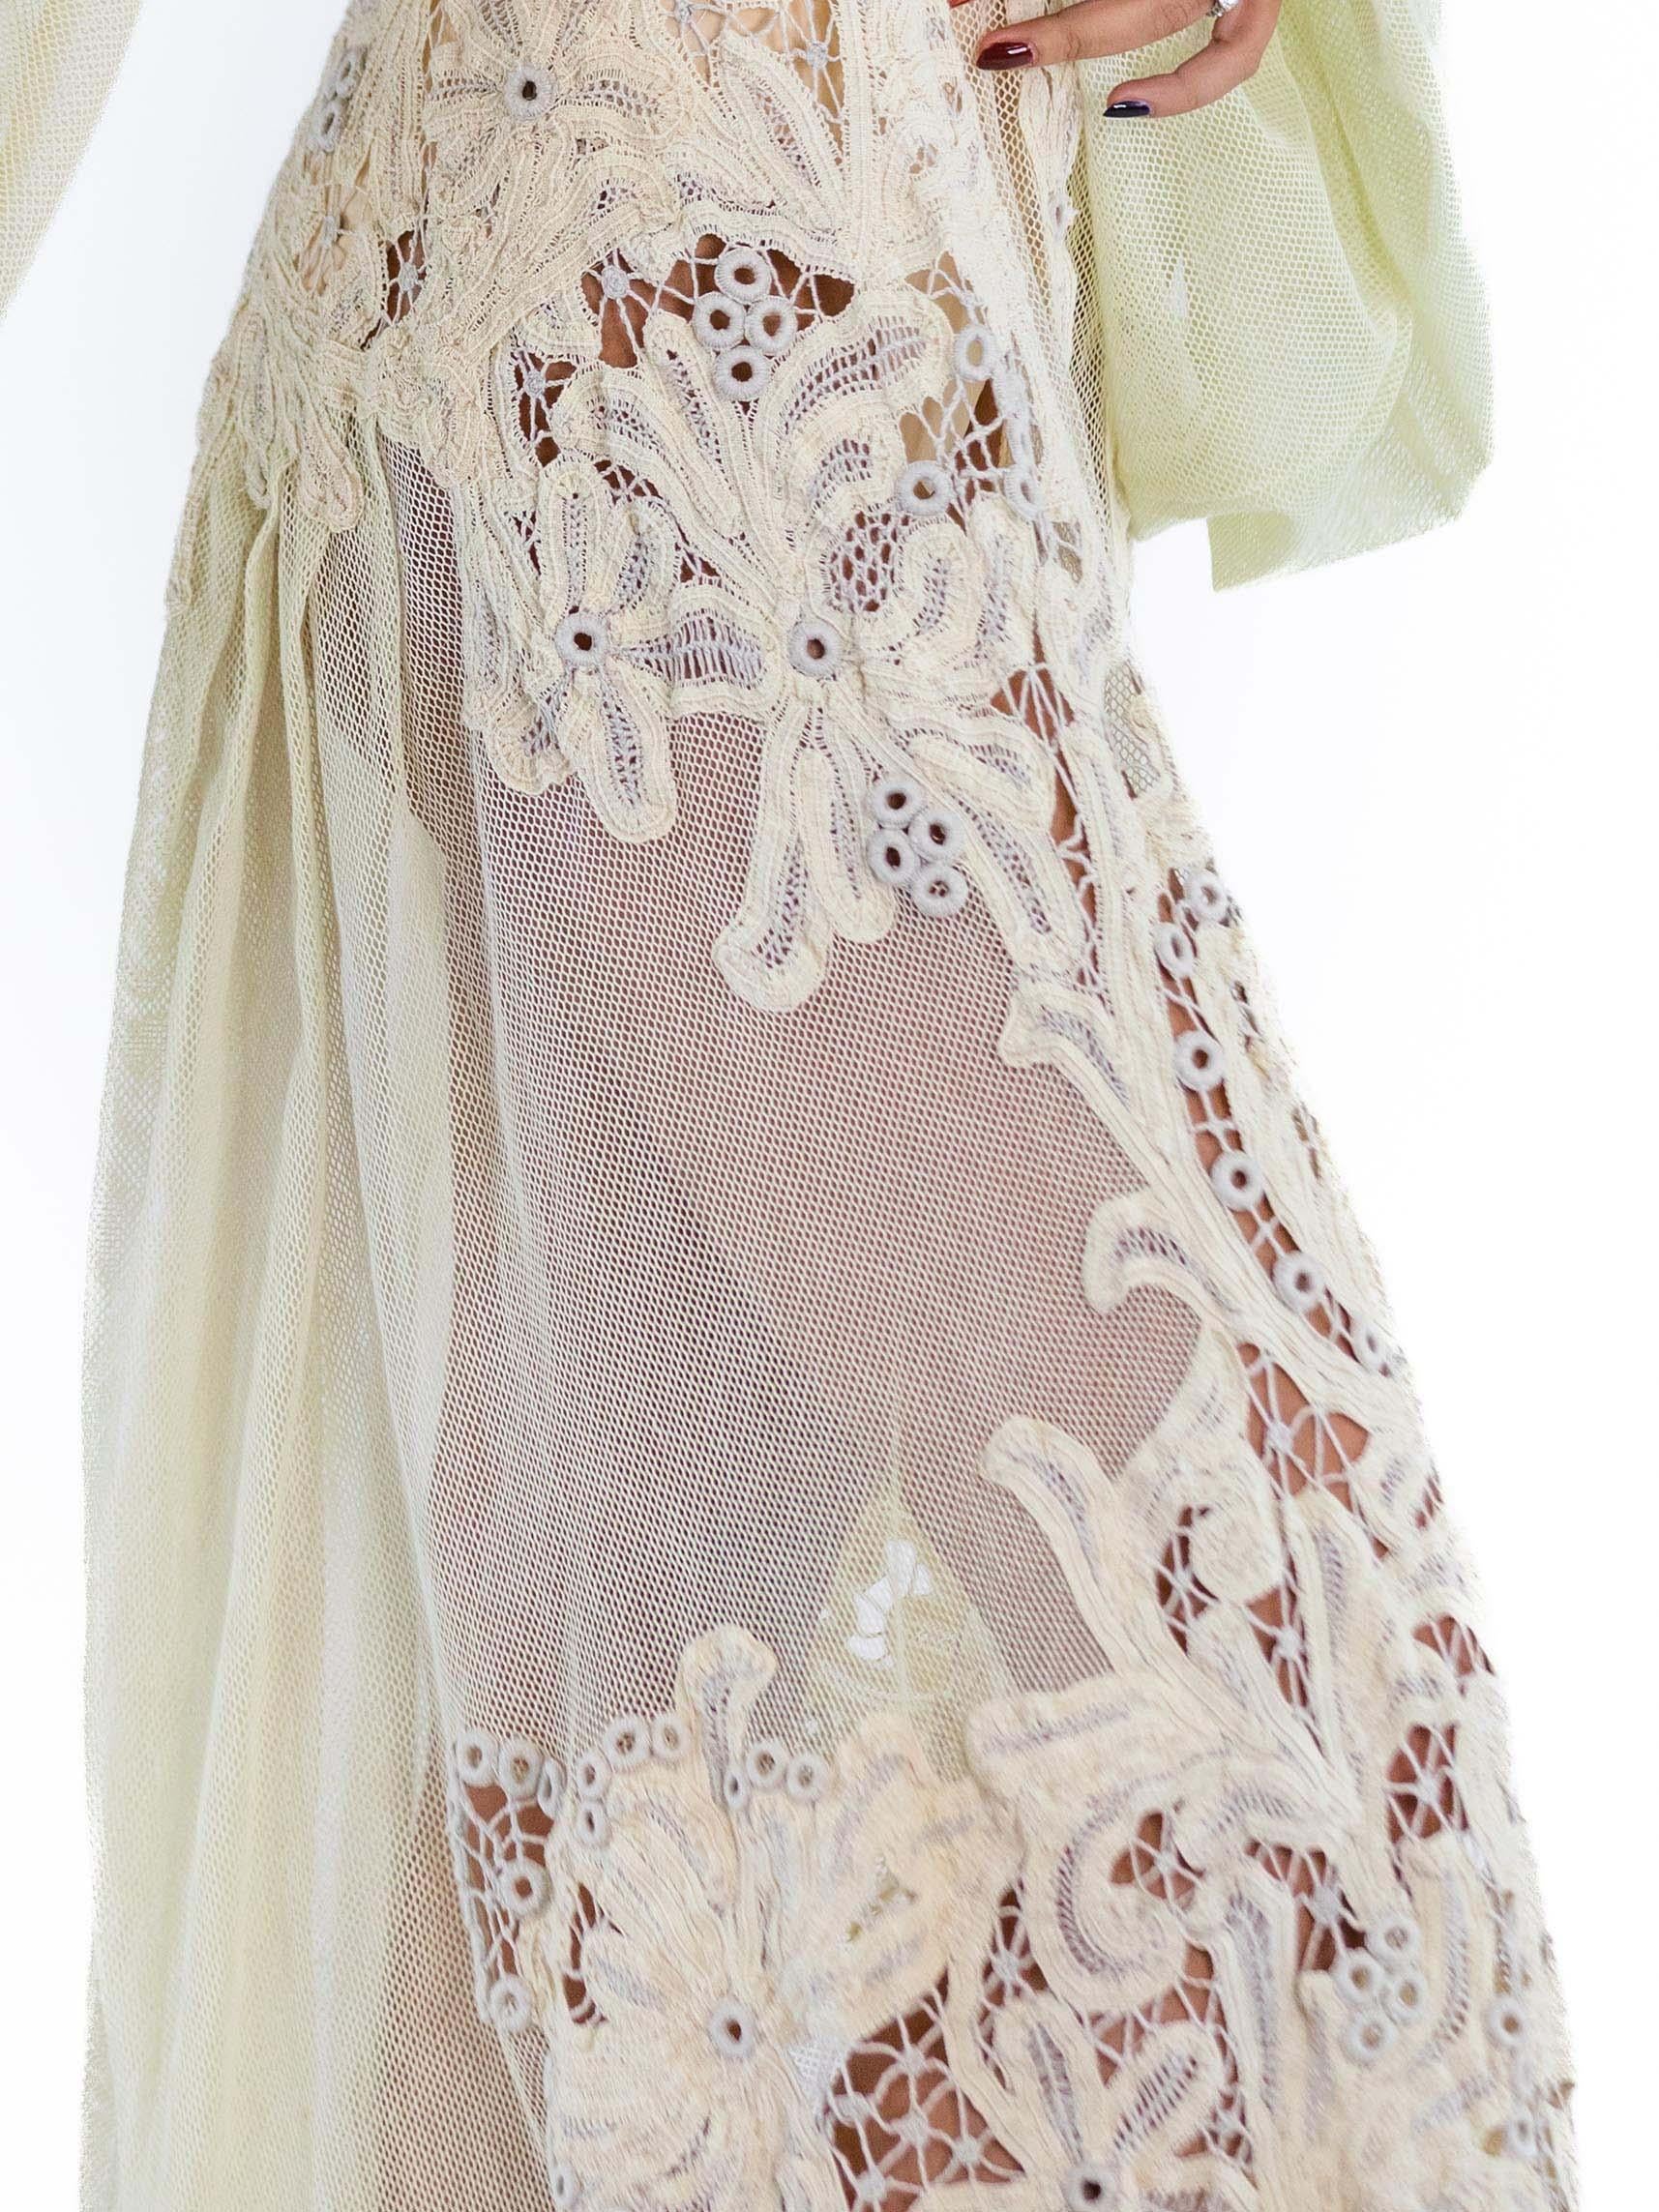 MORPHEW ATELIER Cream Cotton Net & Handmade Victorian Tape Lace Gown With Giant For Sale 5